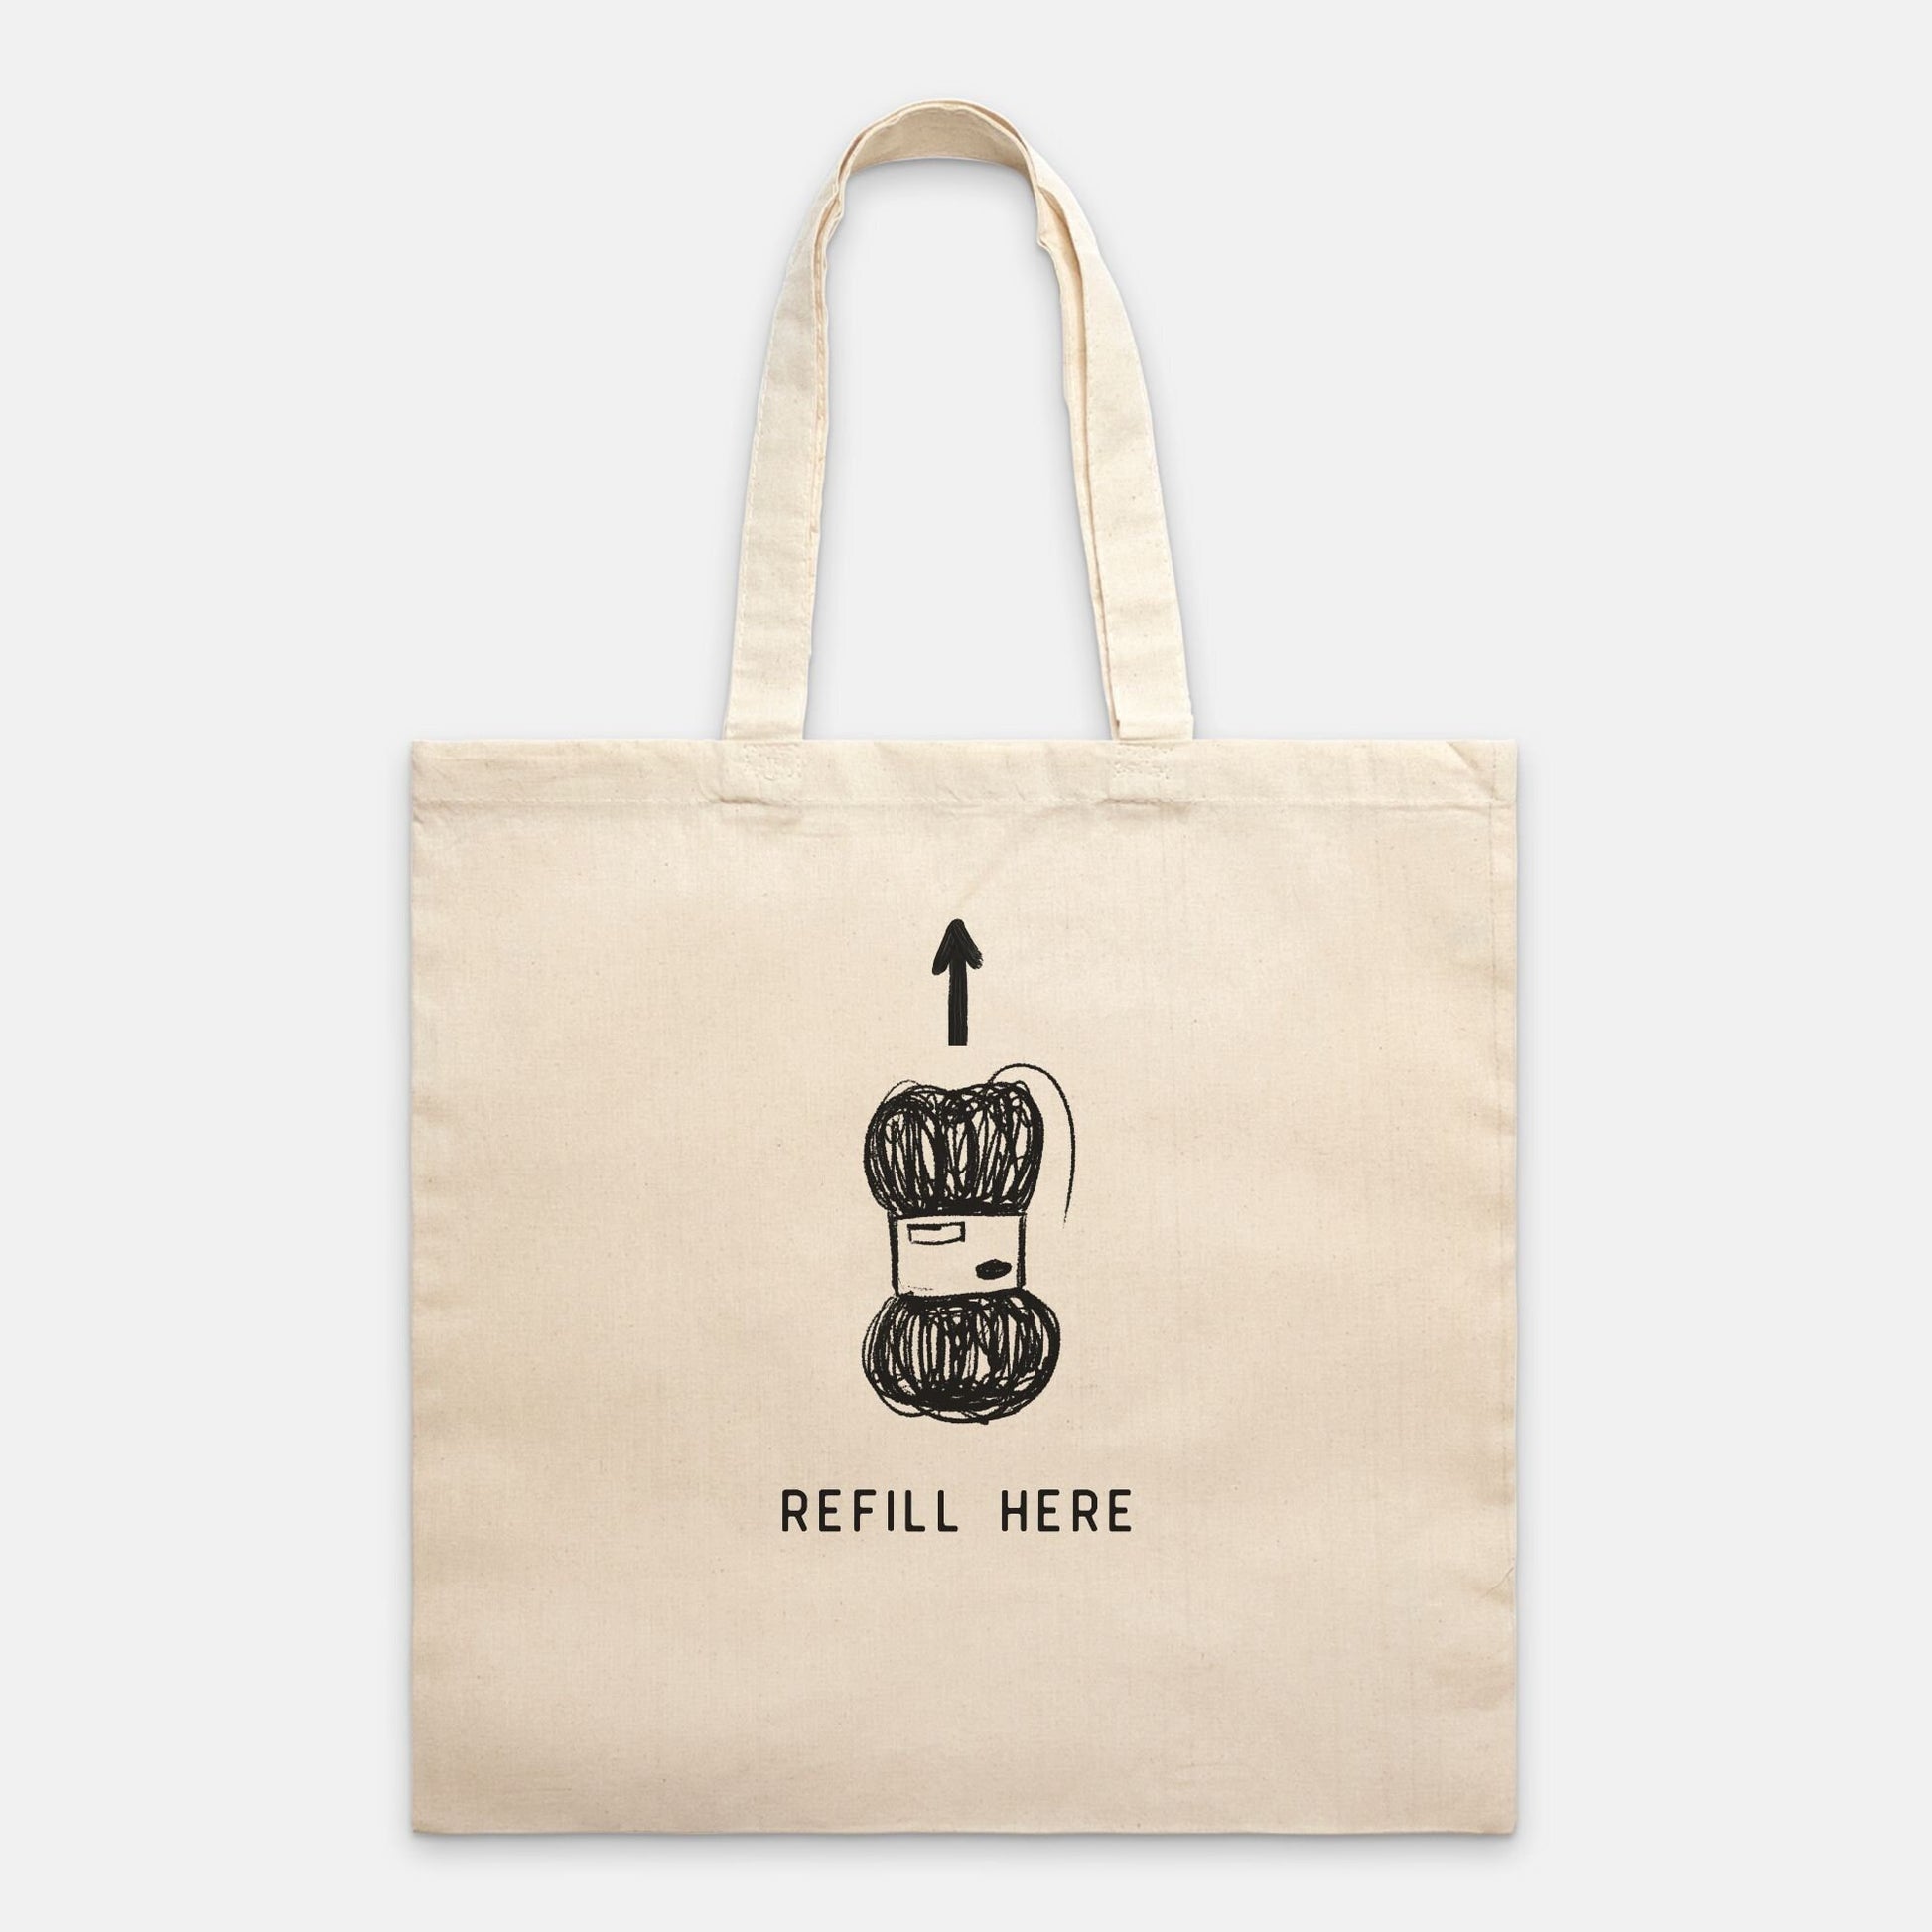 Craft Project Bag • "Refill here" Tote • Cotton Canvas Yarn Bag • Gift For Knitter or Crocheter